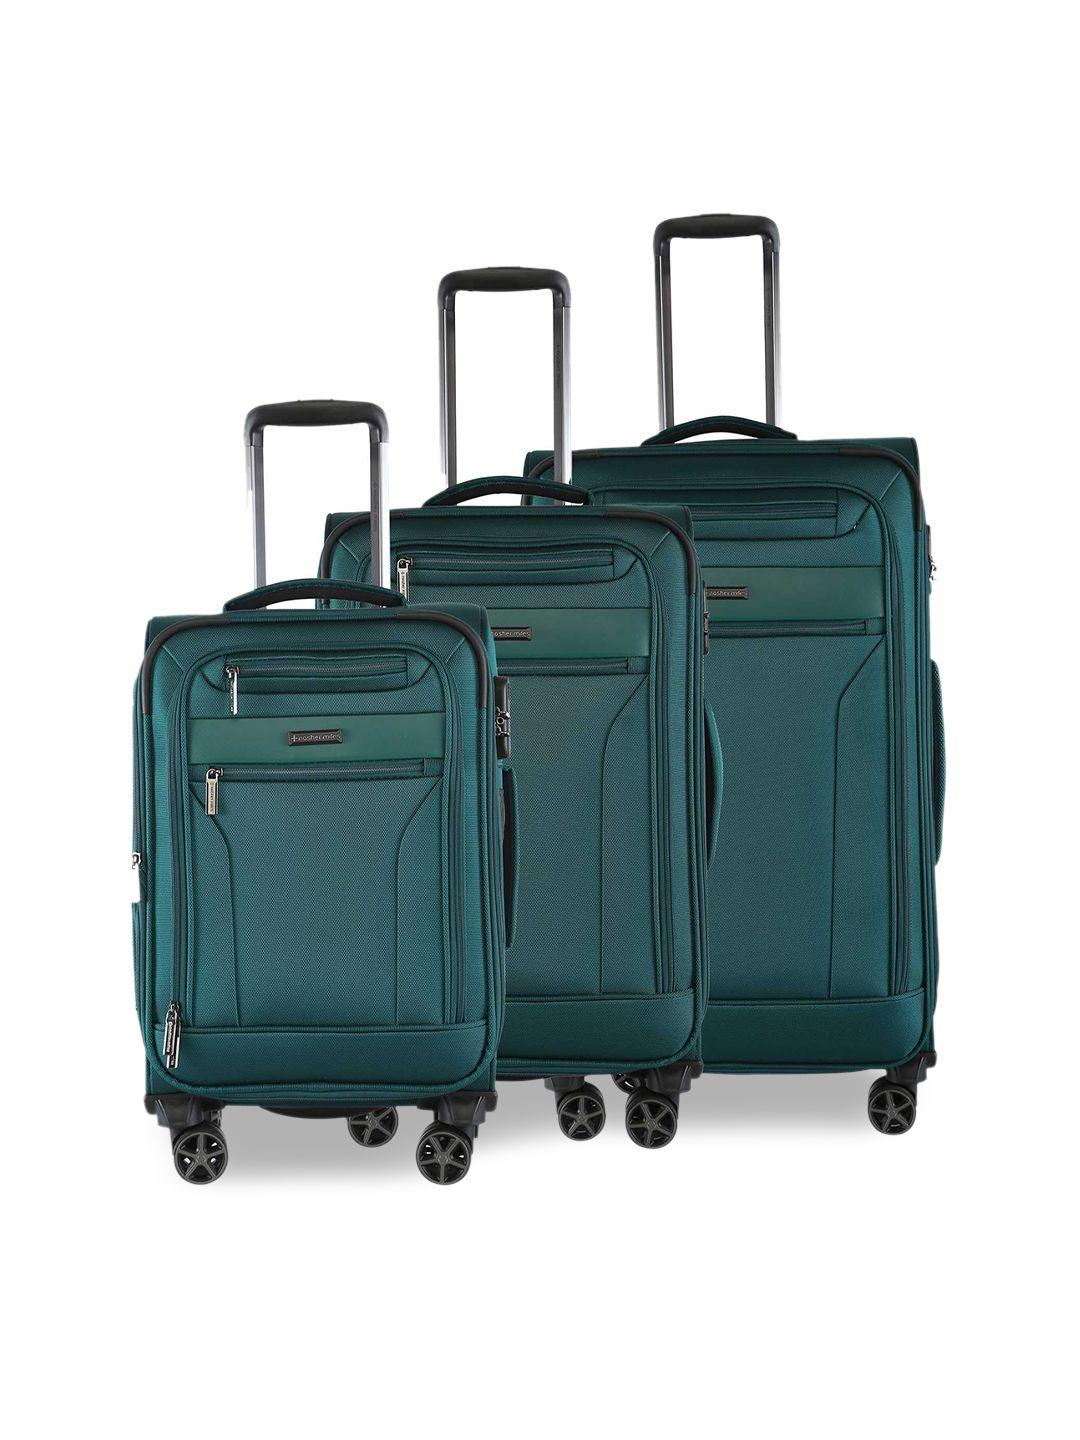 nasher miles set of 3 berlin expander soft trolley bags